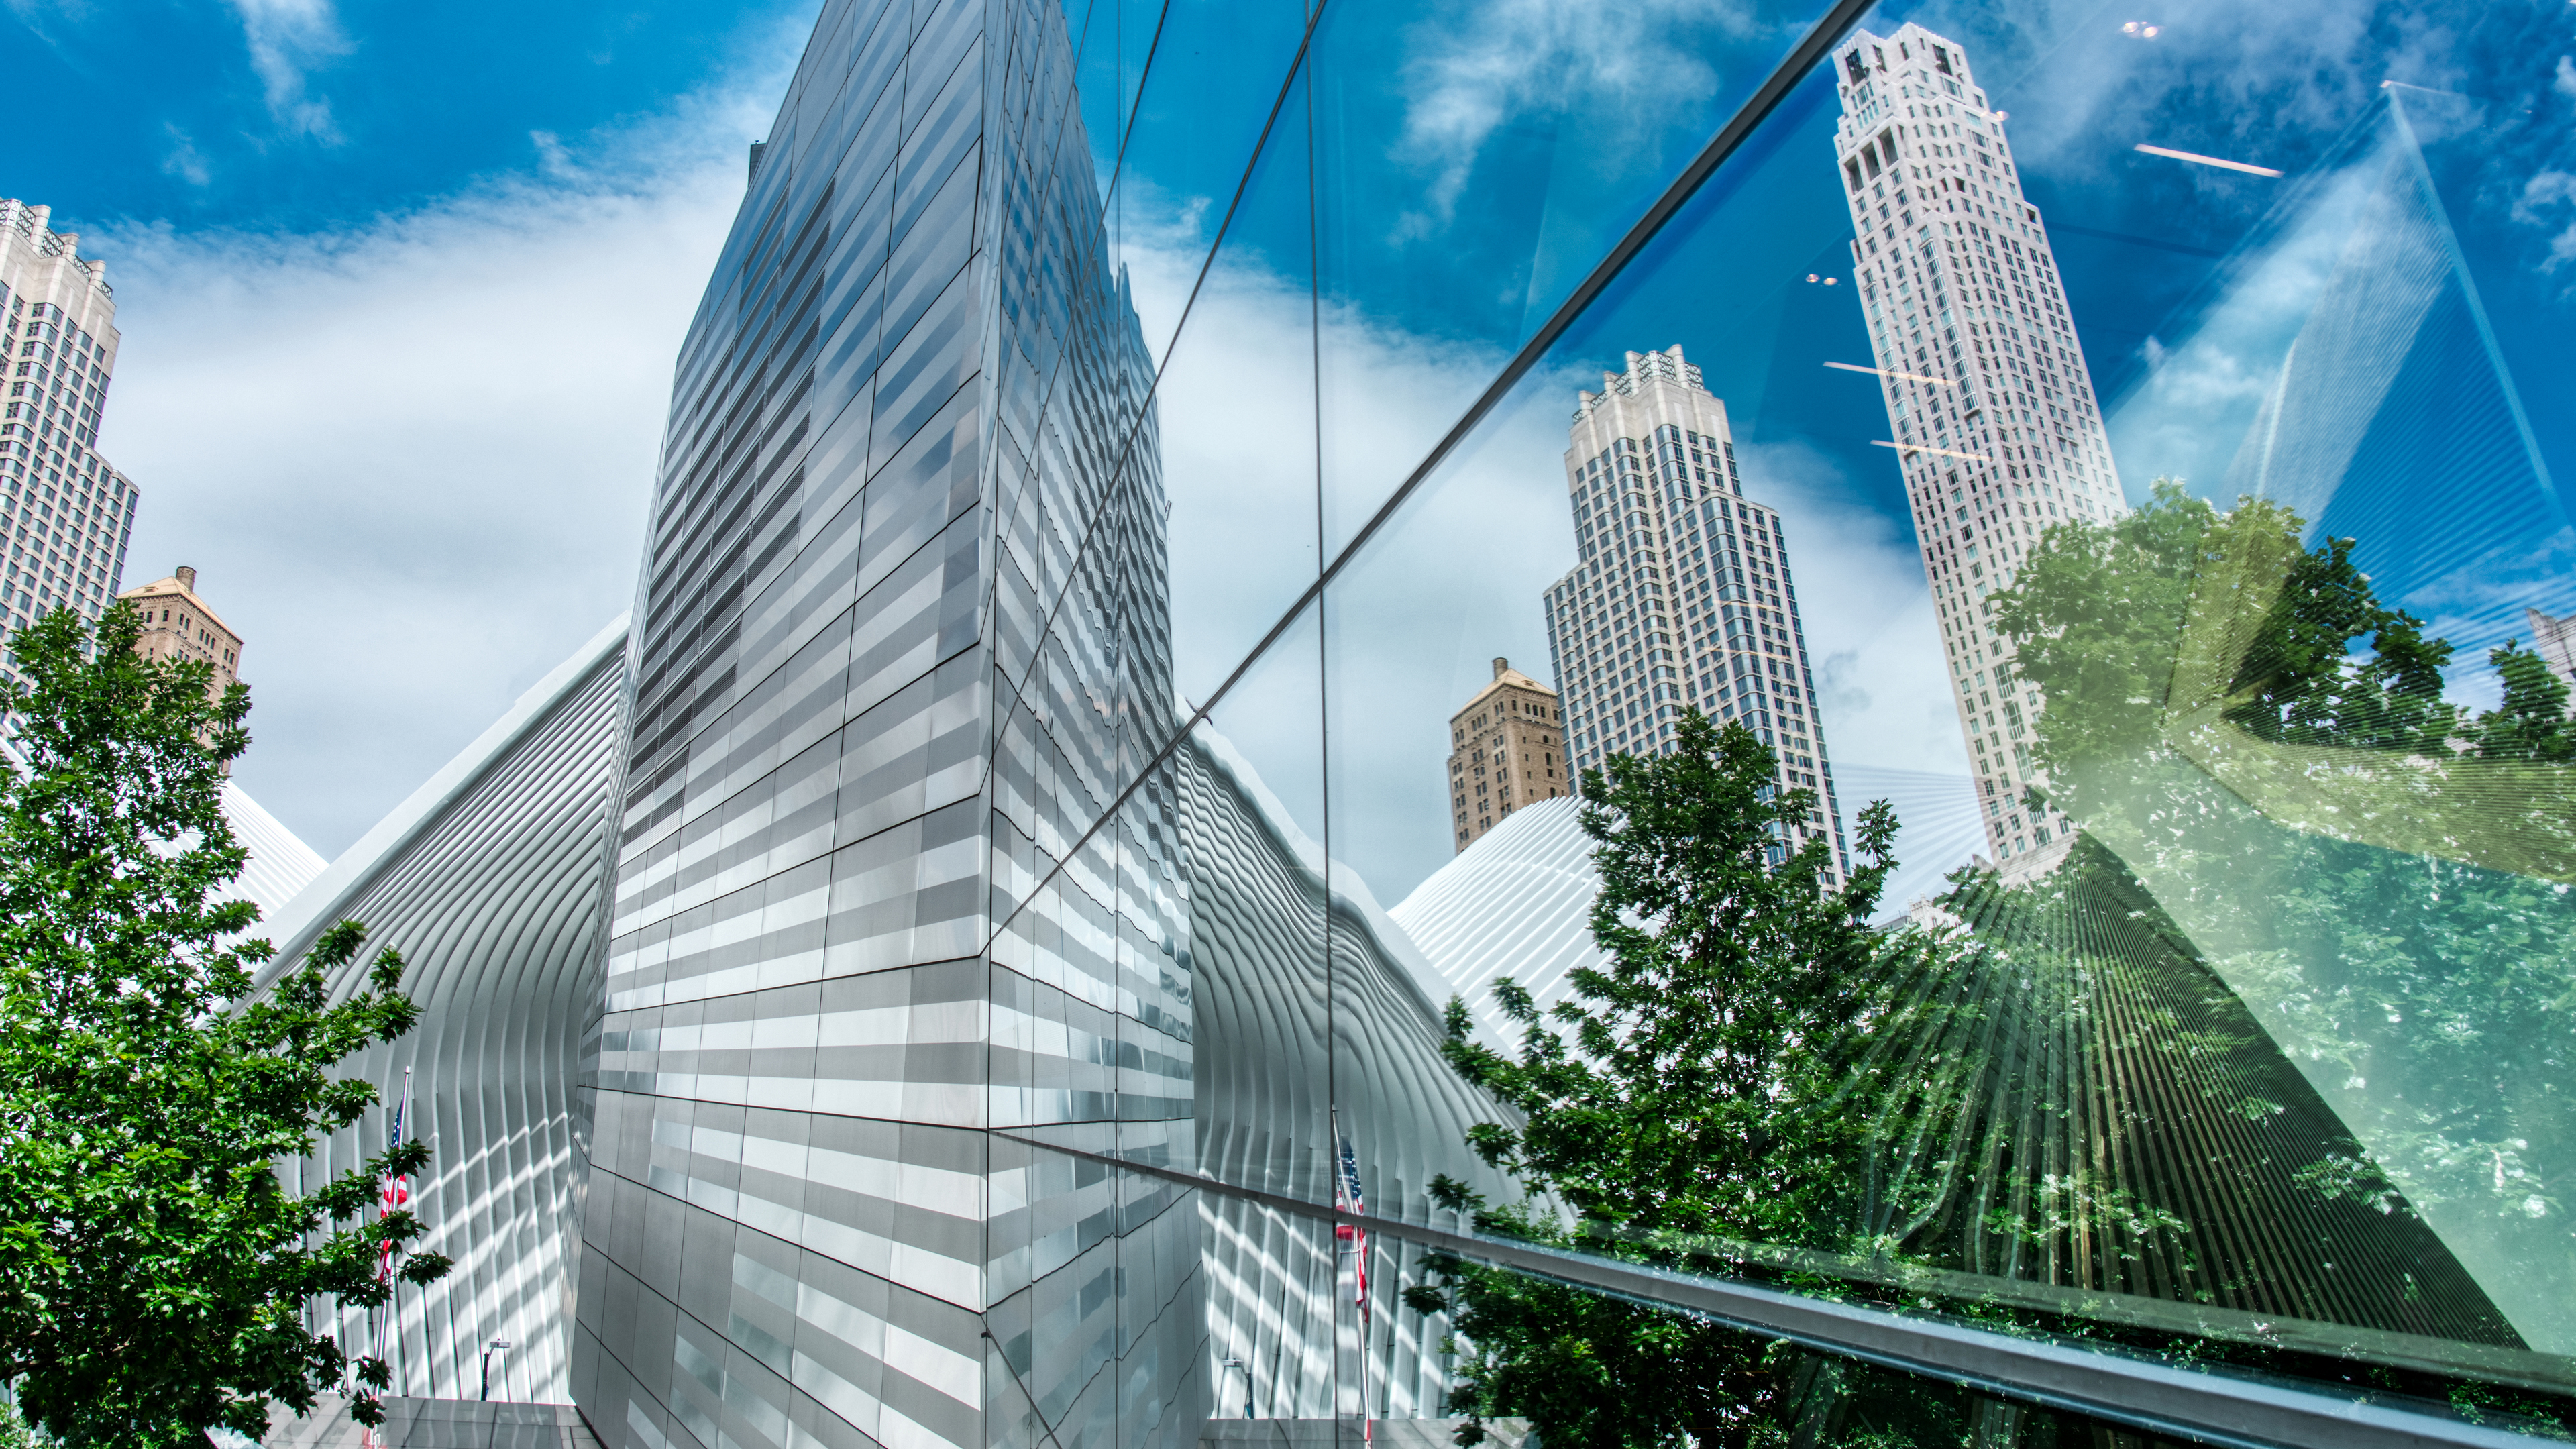 General 3840x2160 Trey Ratcliff photography reflection building clouds sky city